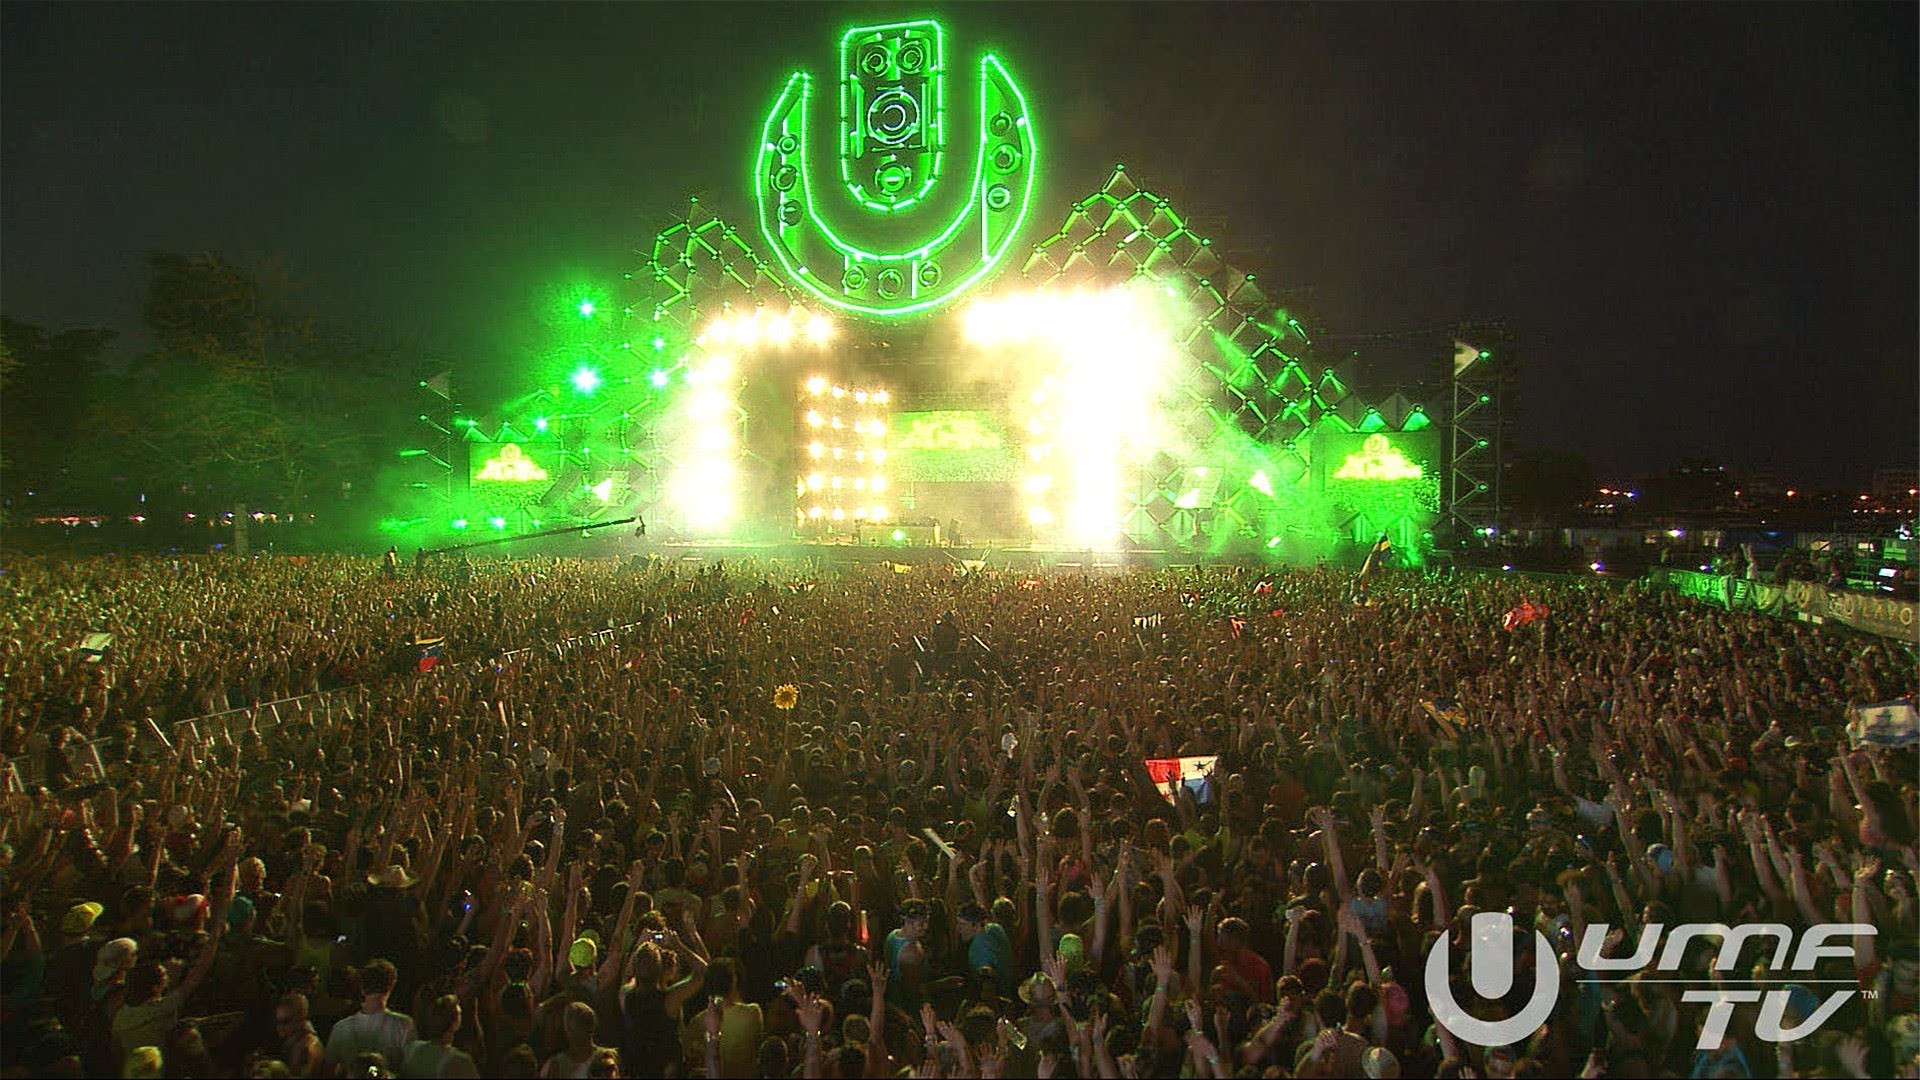 1920x1080 Hardwell live at Ultra Music Festival 2013 - FULL HD Broadcast by UMF.TV -  YouTube